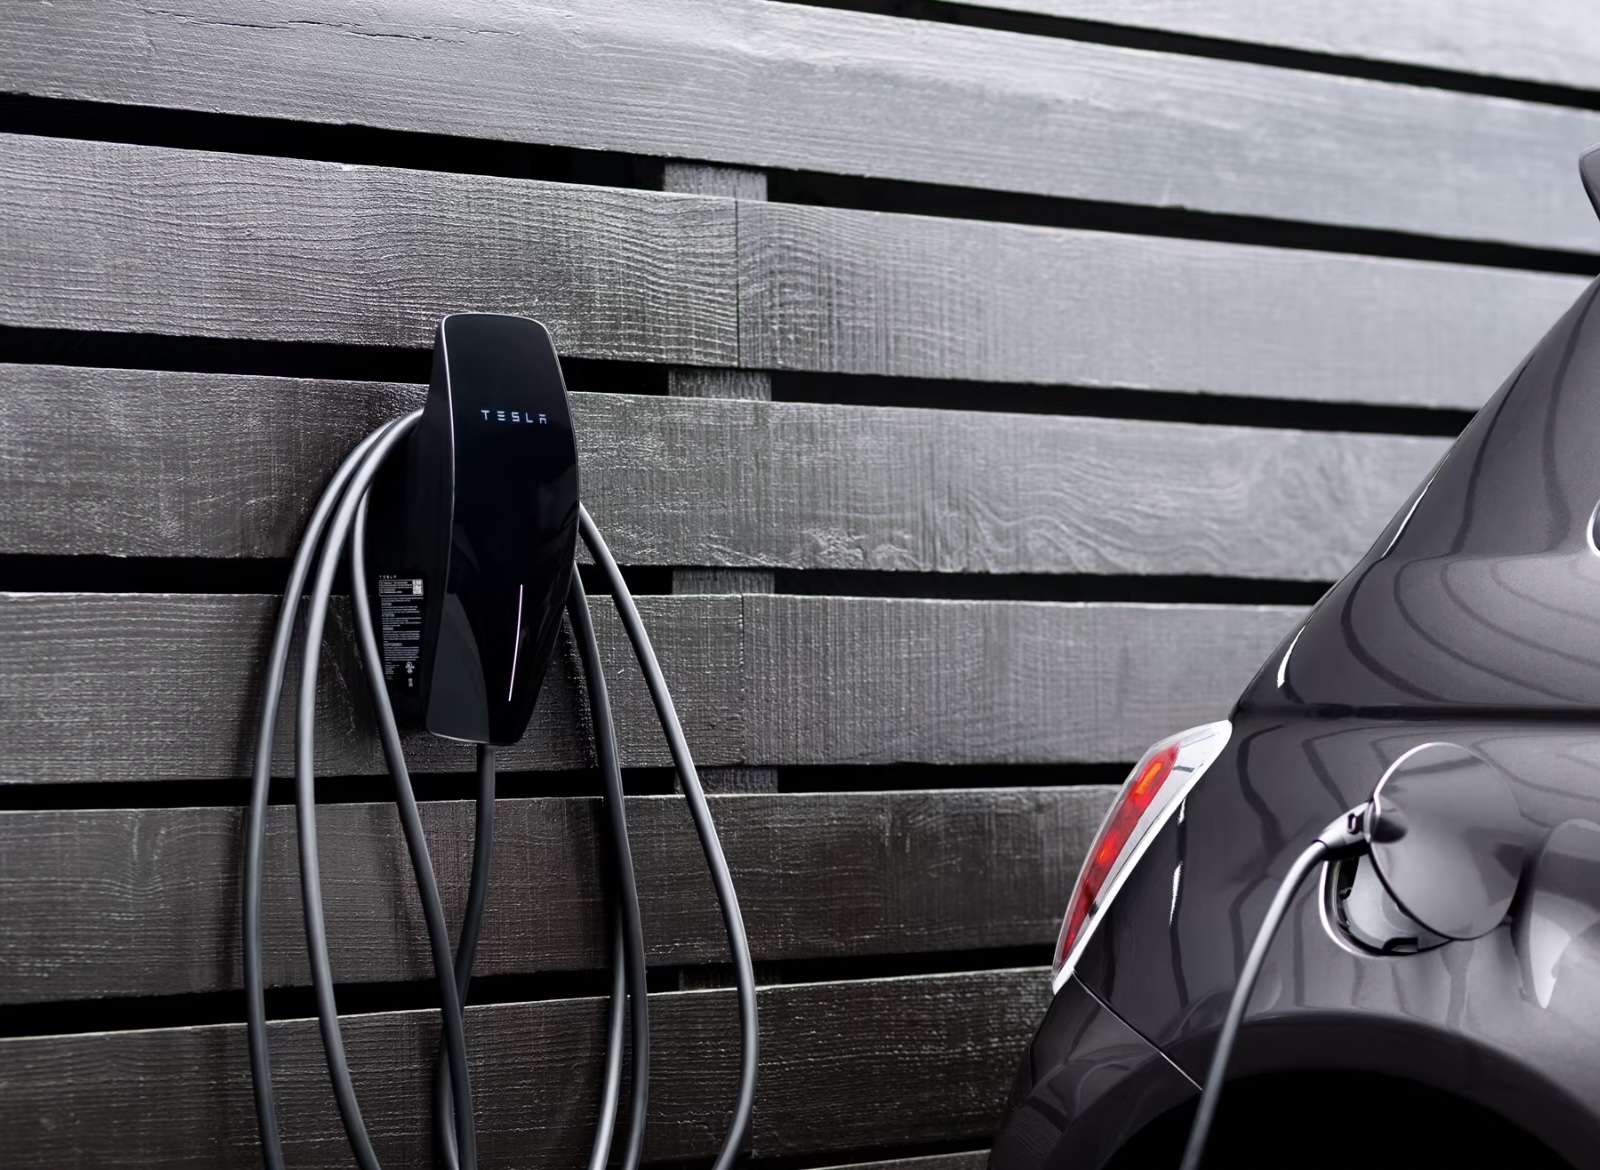 tesla-announces-j1772-wall-connector-level-2-home-charger-charges-non